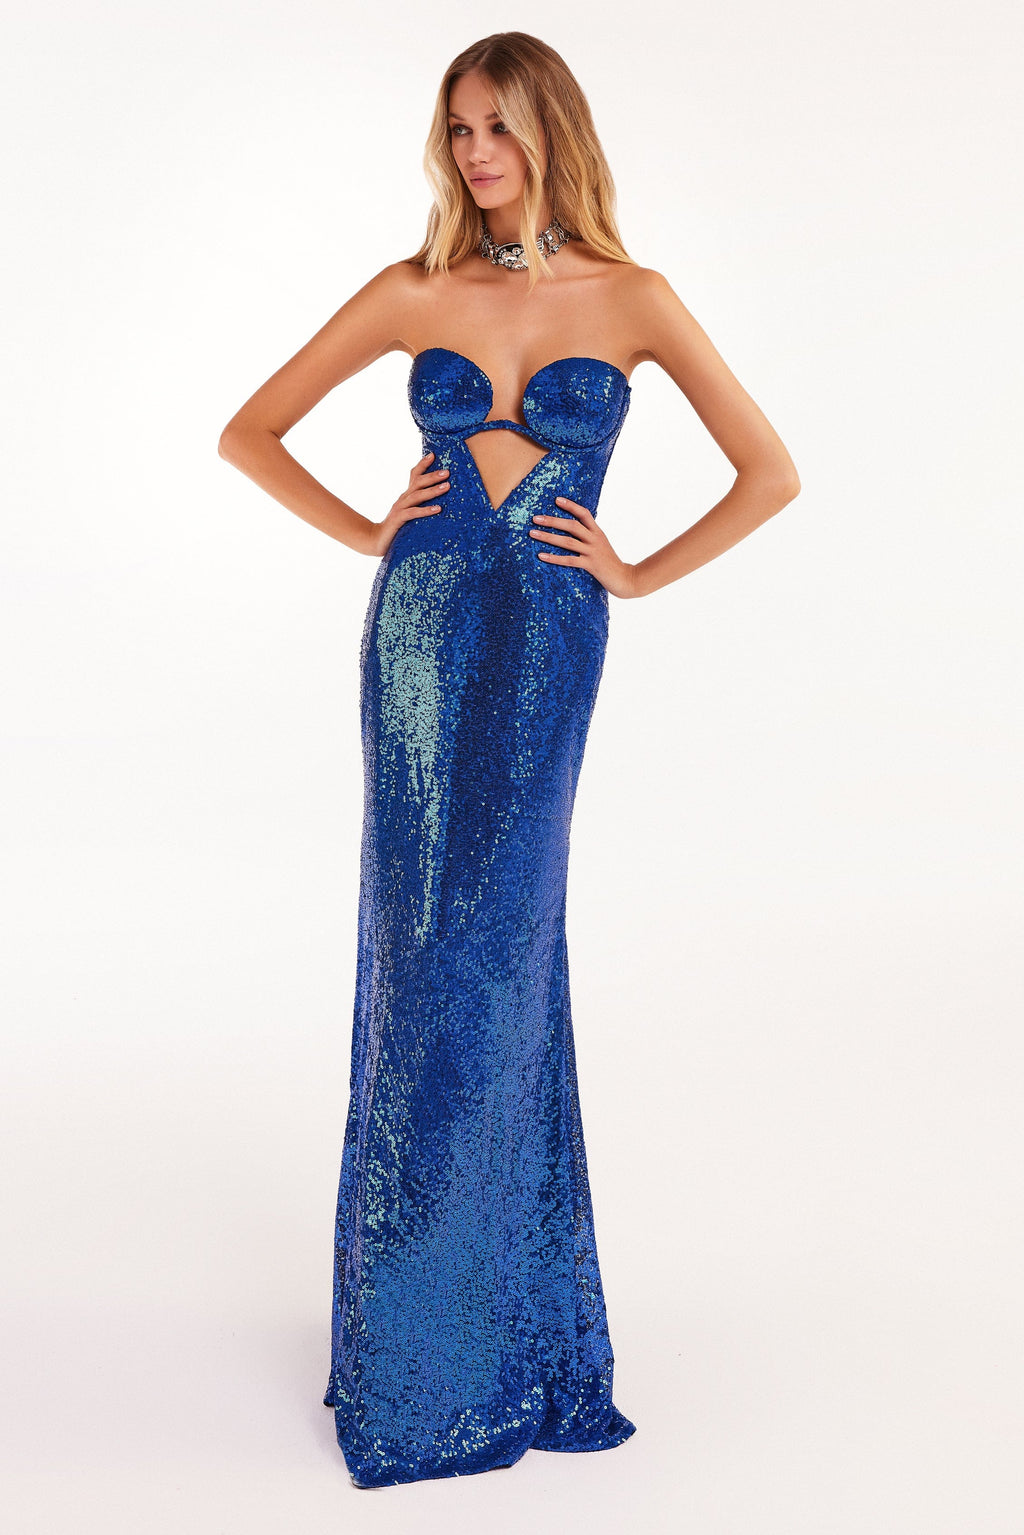 Electric blue maxi dress covered in sequins